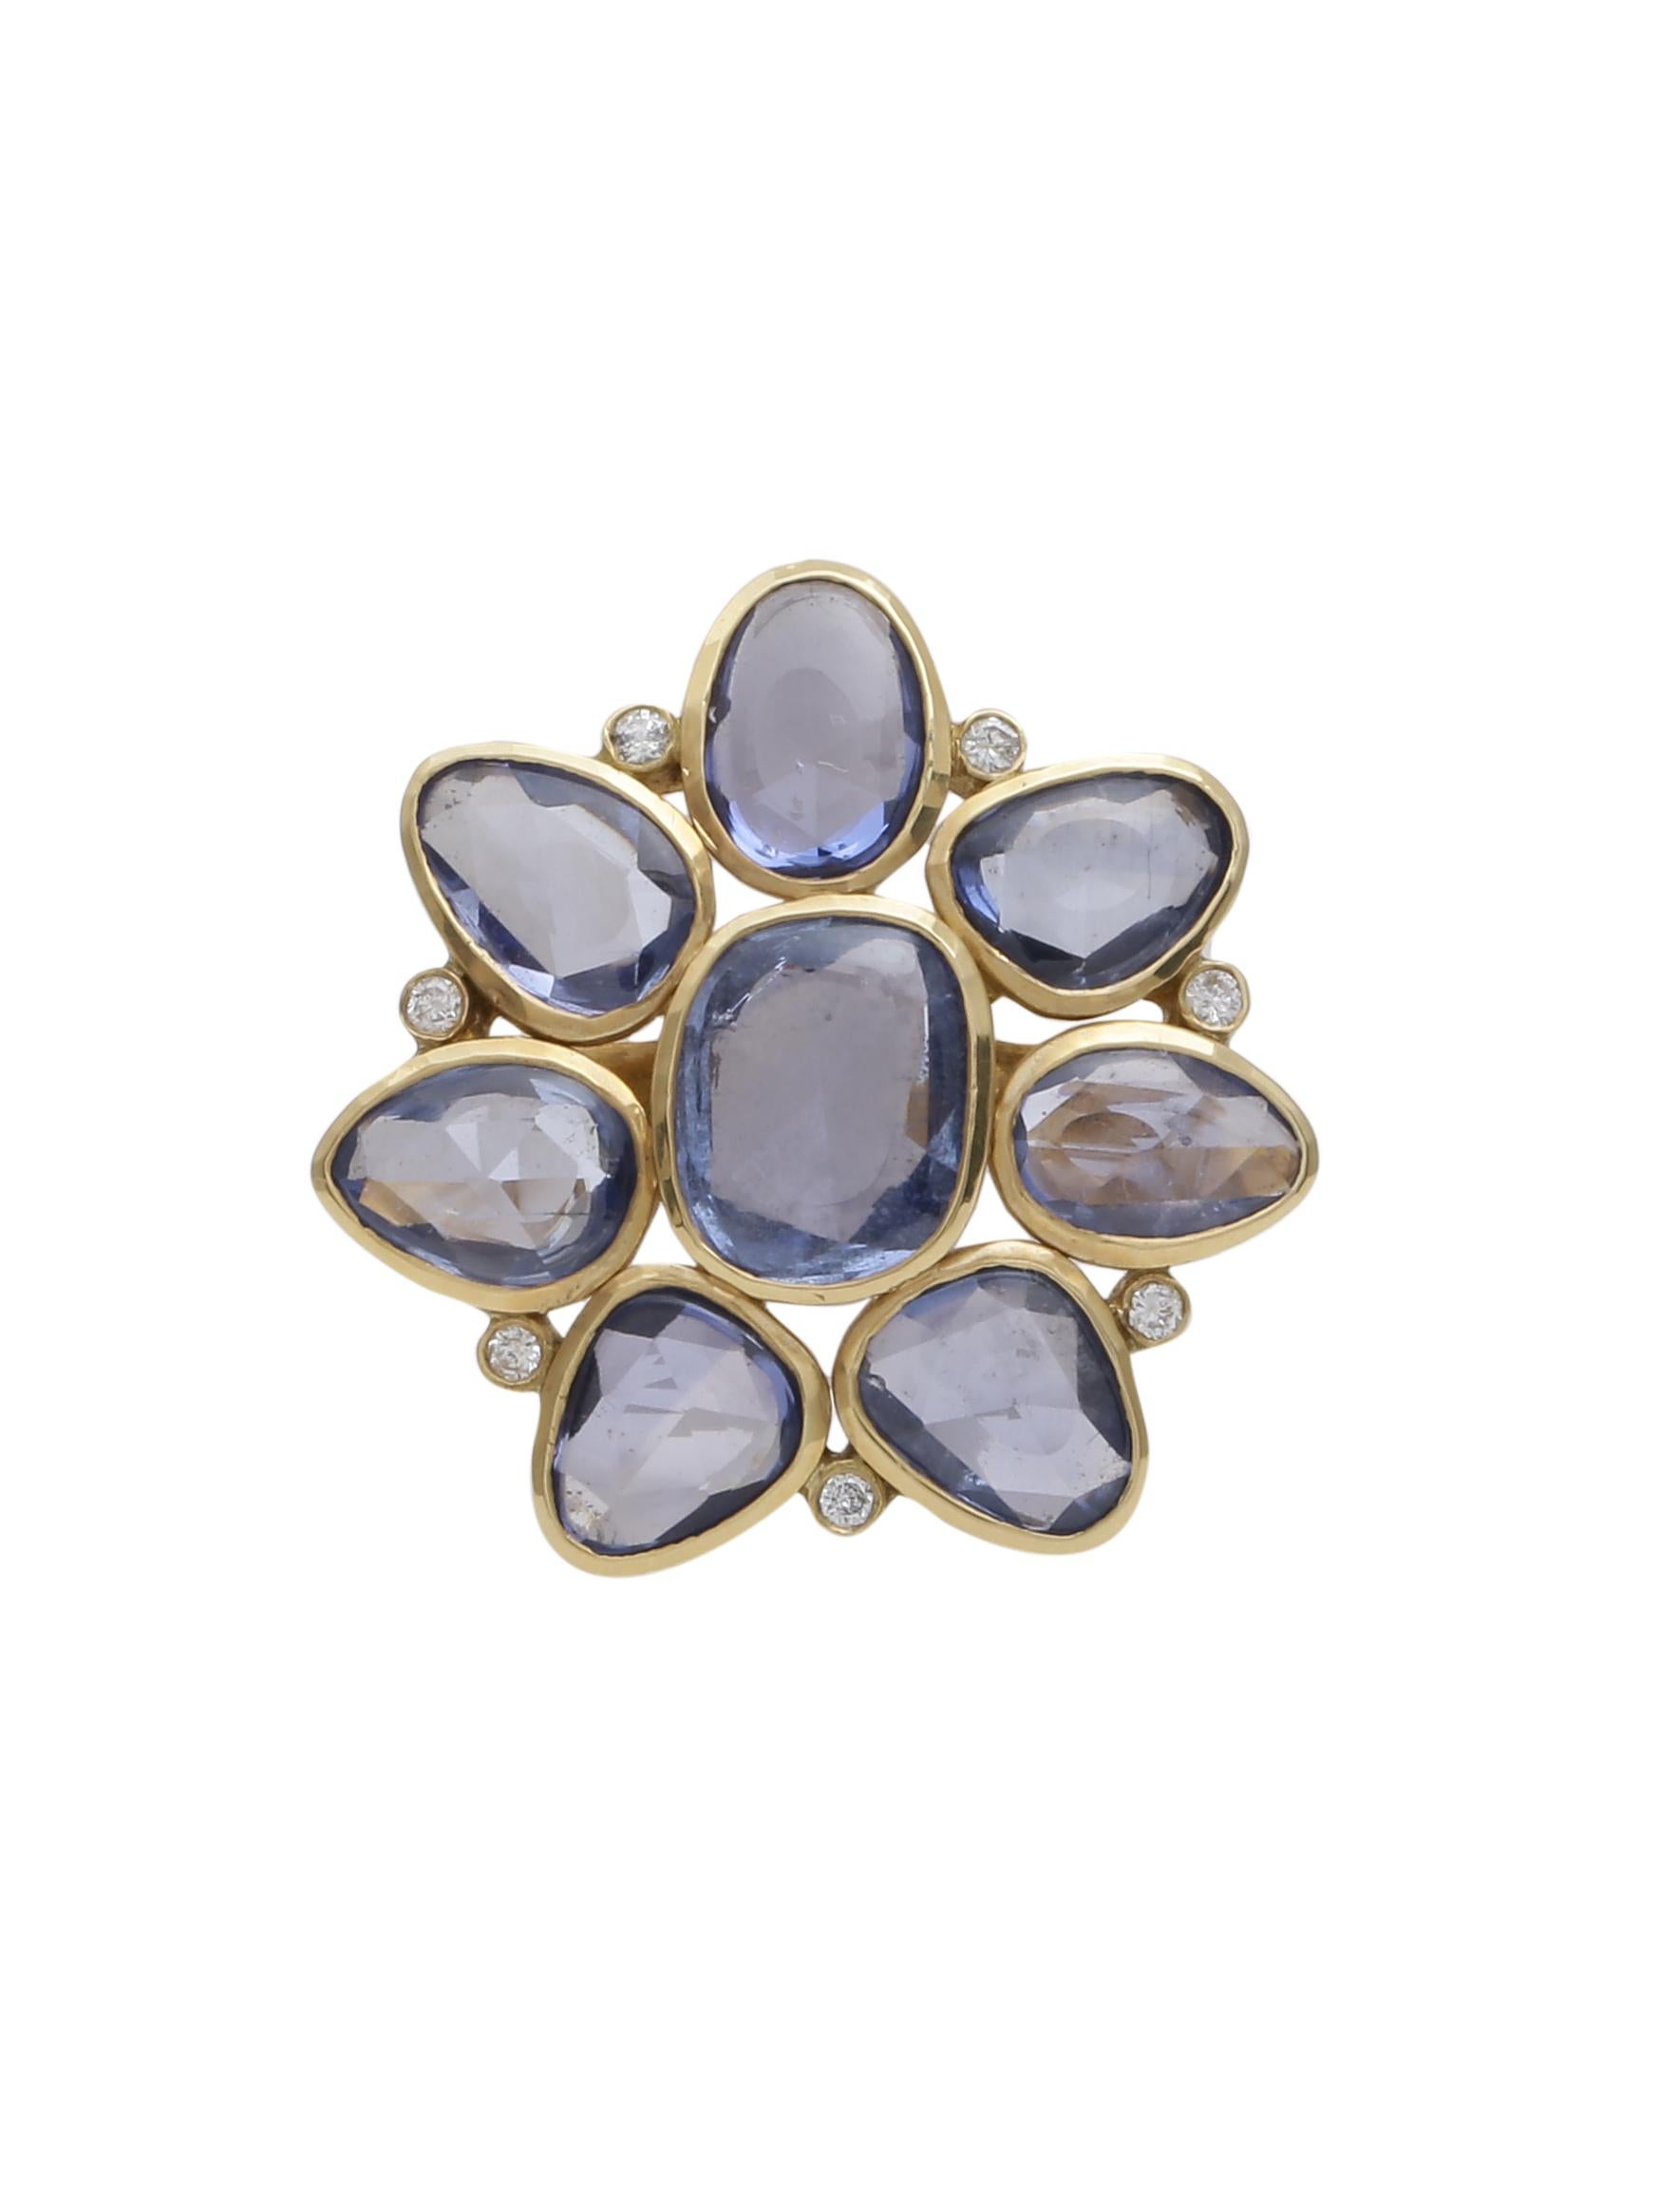 Blue Sapphires rosecuts and Diamonds closely set in a way to give a floral design. The asymmetric Sapphires are set in gold bezels and are given shape.  The ring is all Handcrafted in 18K Yellow Gold. The ring has 6.35 carats Sapphires, 0.07 carats